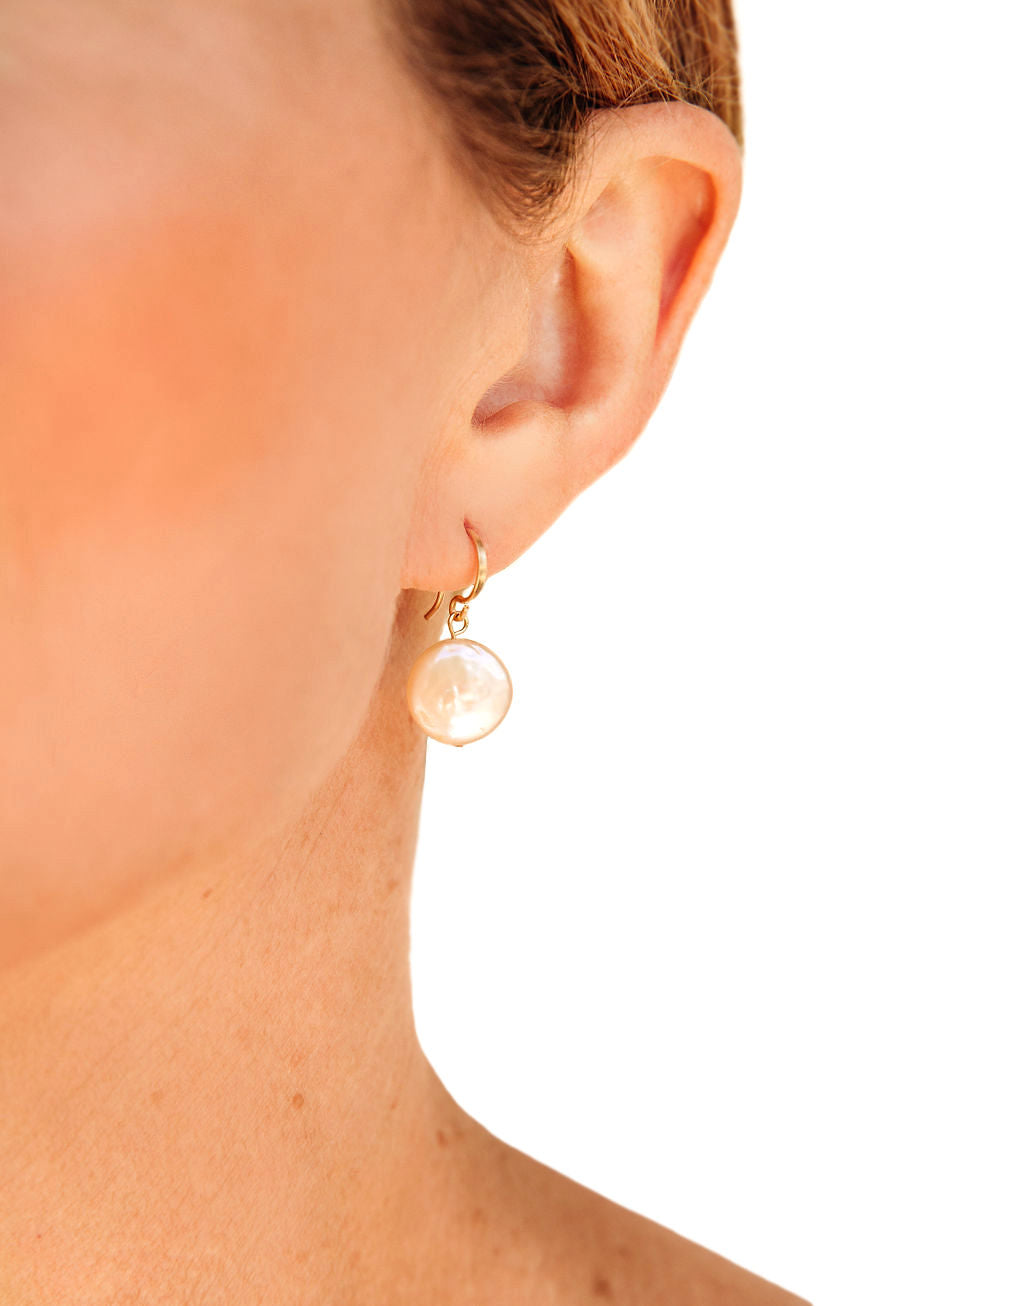 Small Pearl Coin Earrings with 14k gold details.  These half-inch minimalist beauties are the most symmetrical of the pearls I offer, they are a warm white almost pink in color.